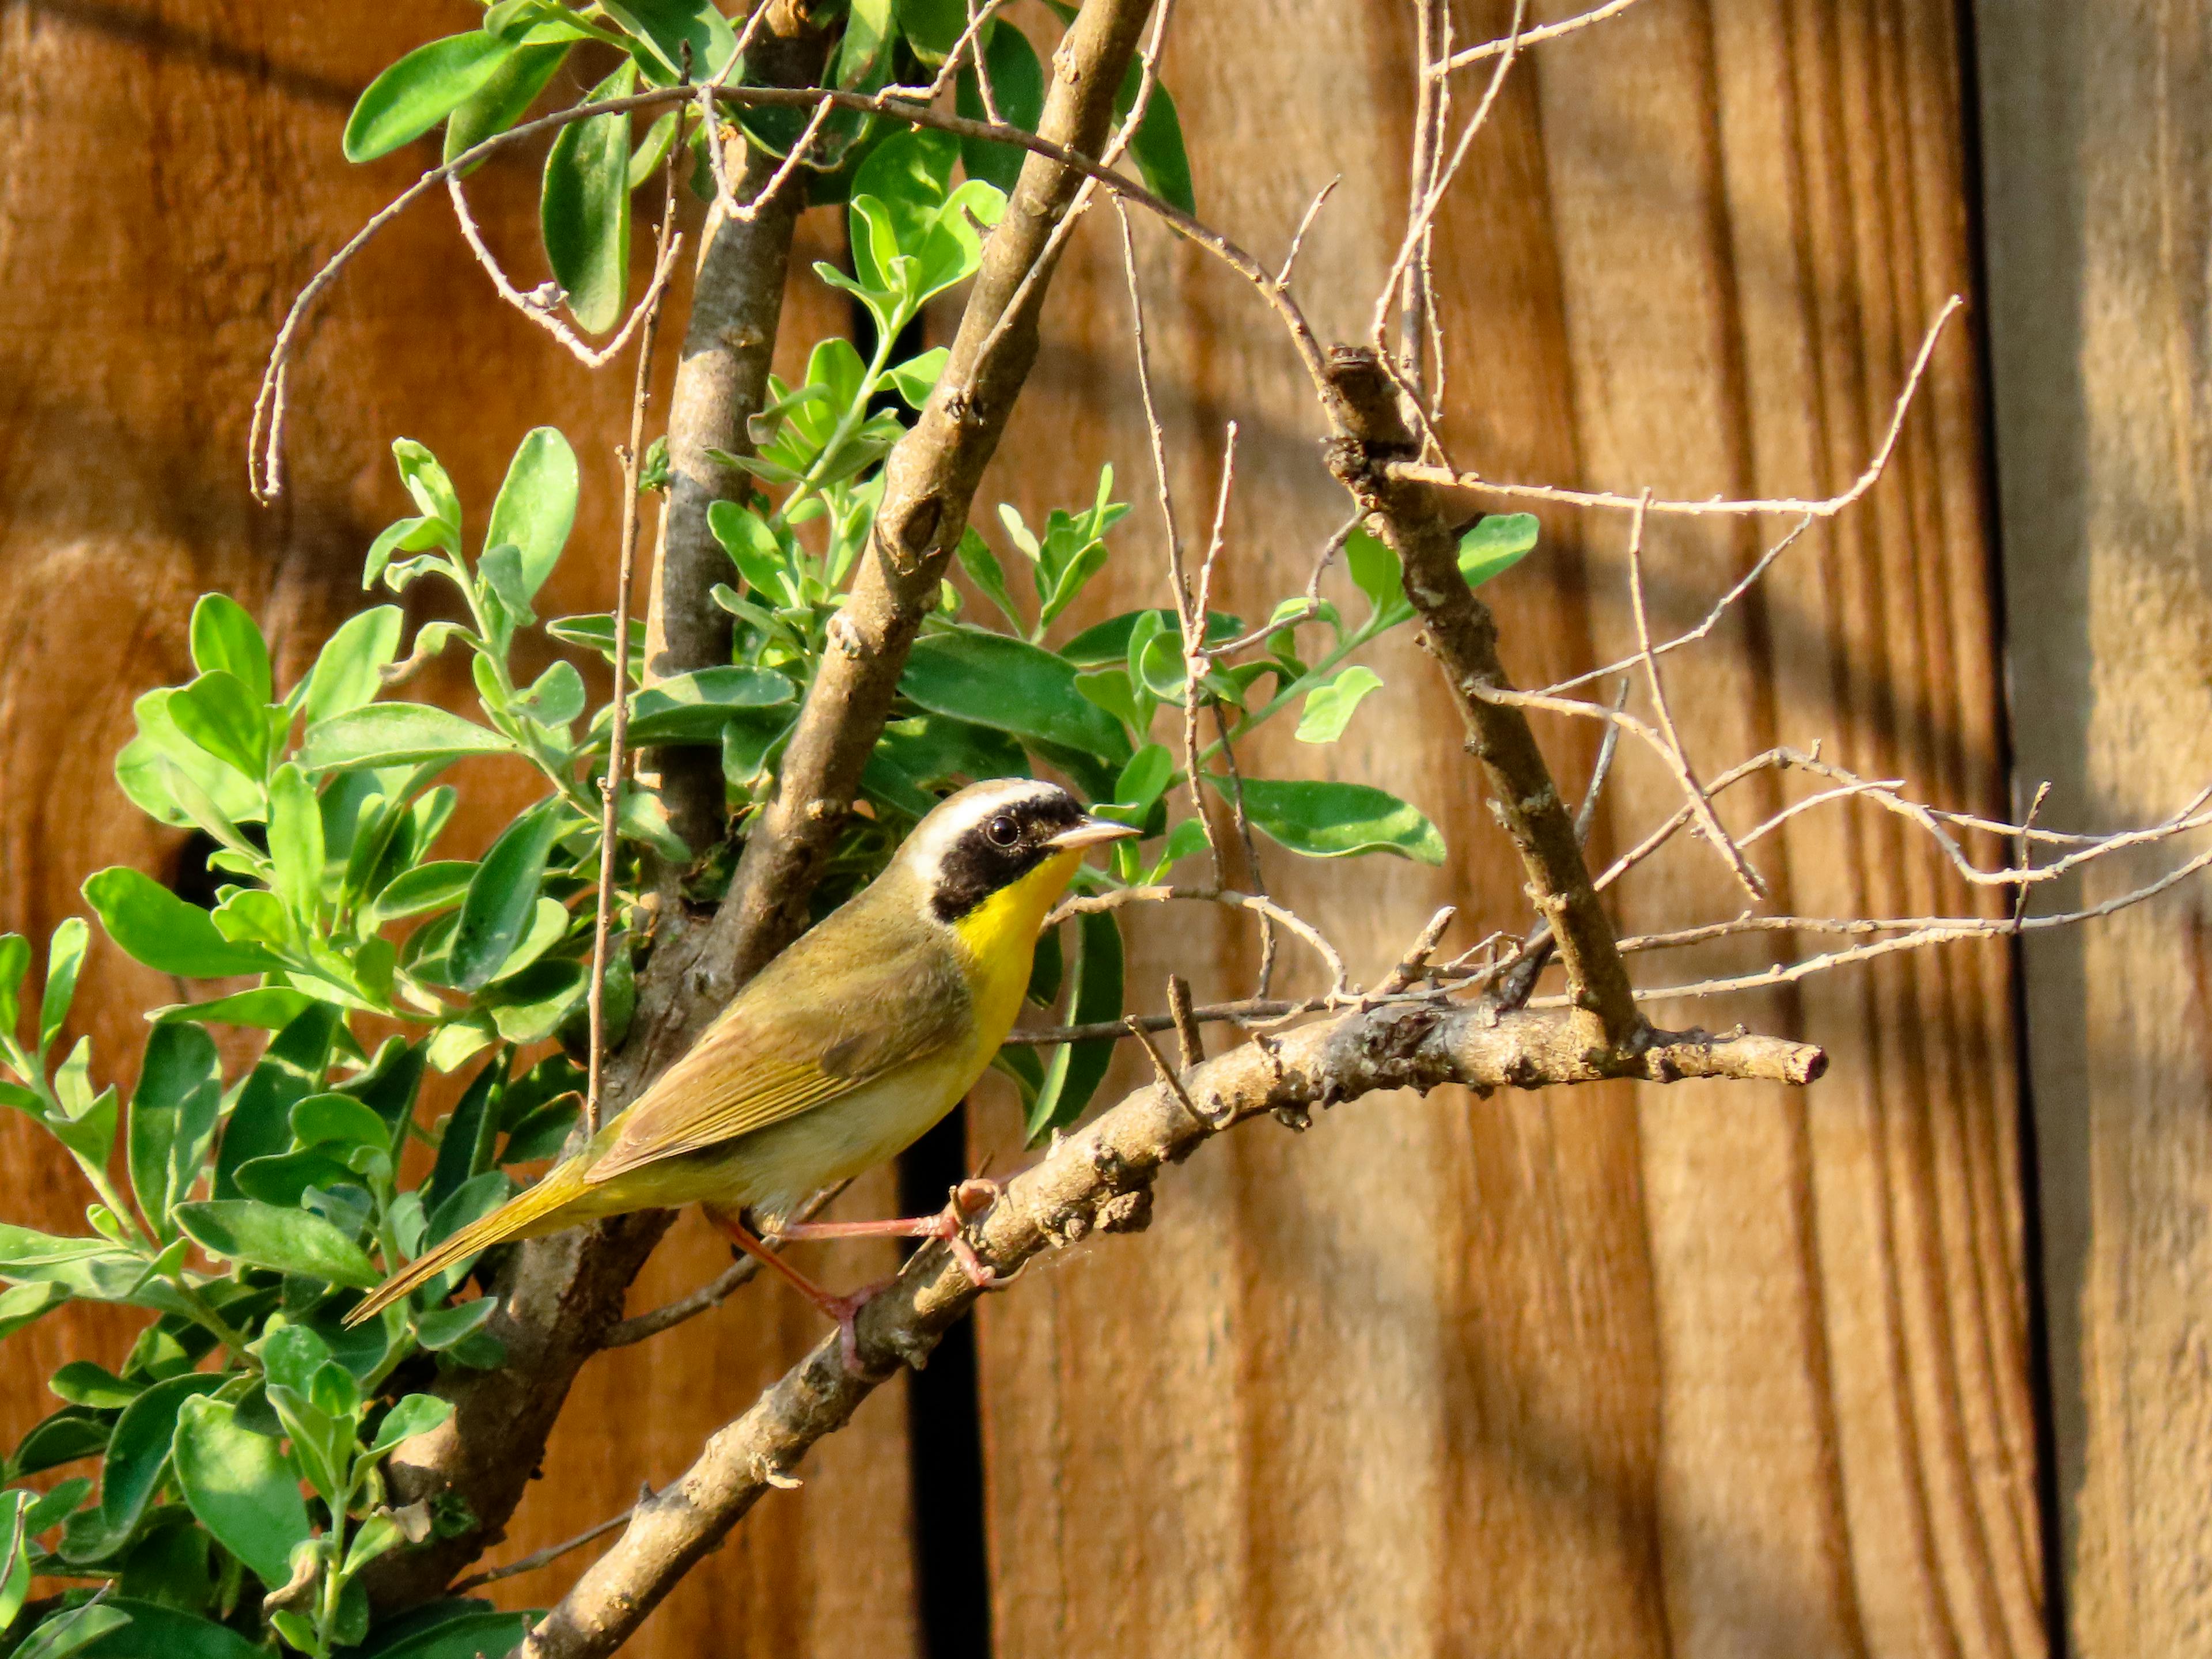 Common Yellowthroat in a sage bush in Central Texas